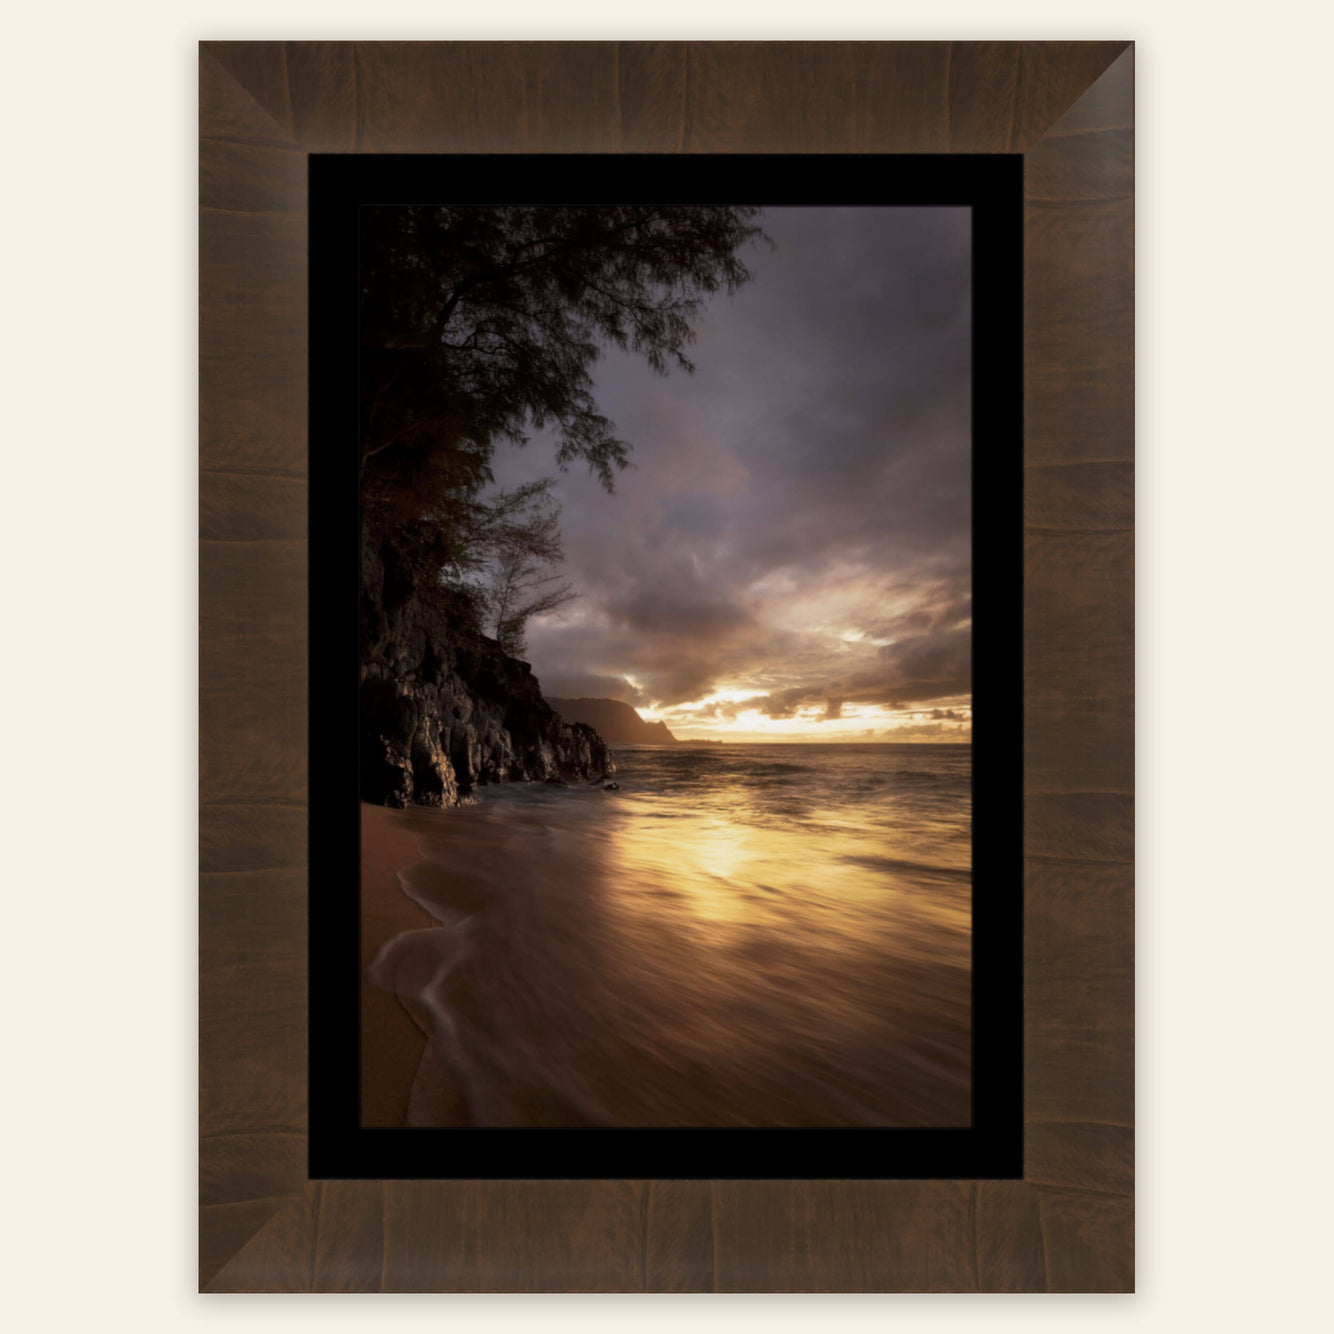 A TruLife acrylic Hideaway Beach picture from one of the best beaches on Kauai.